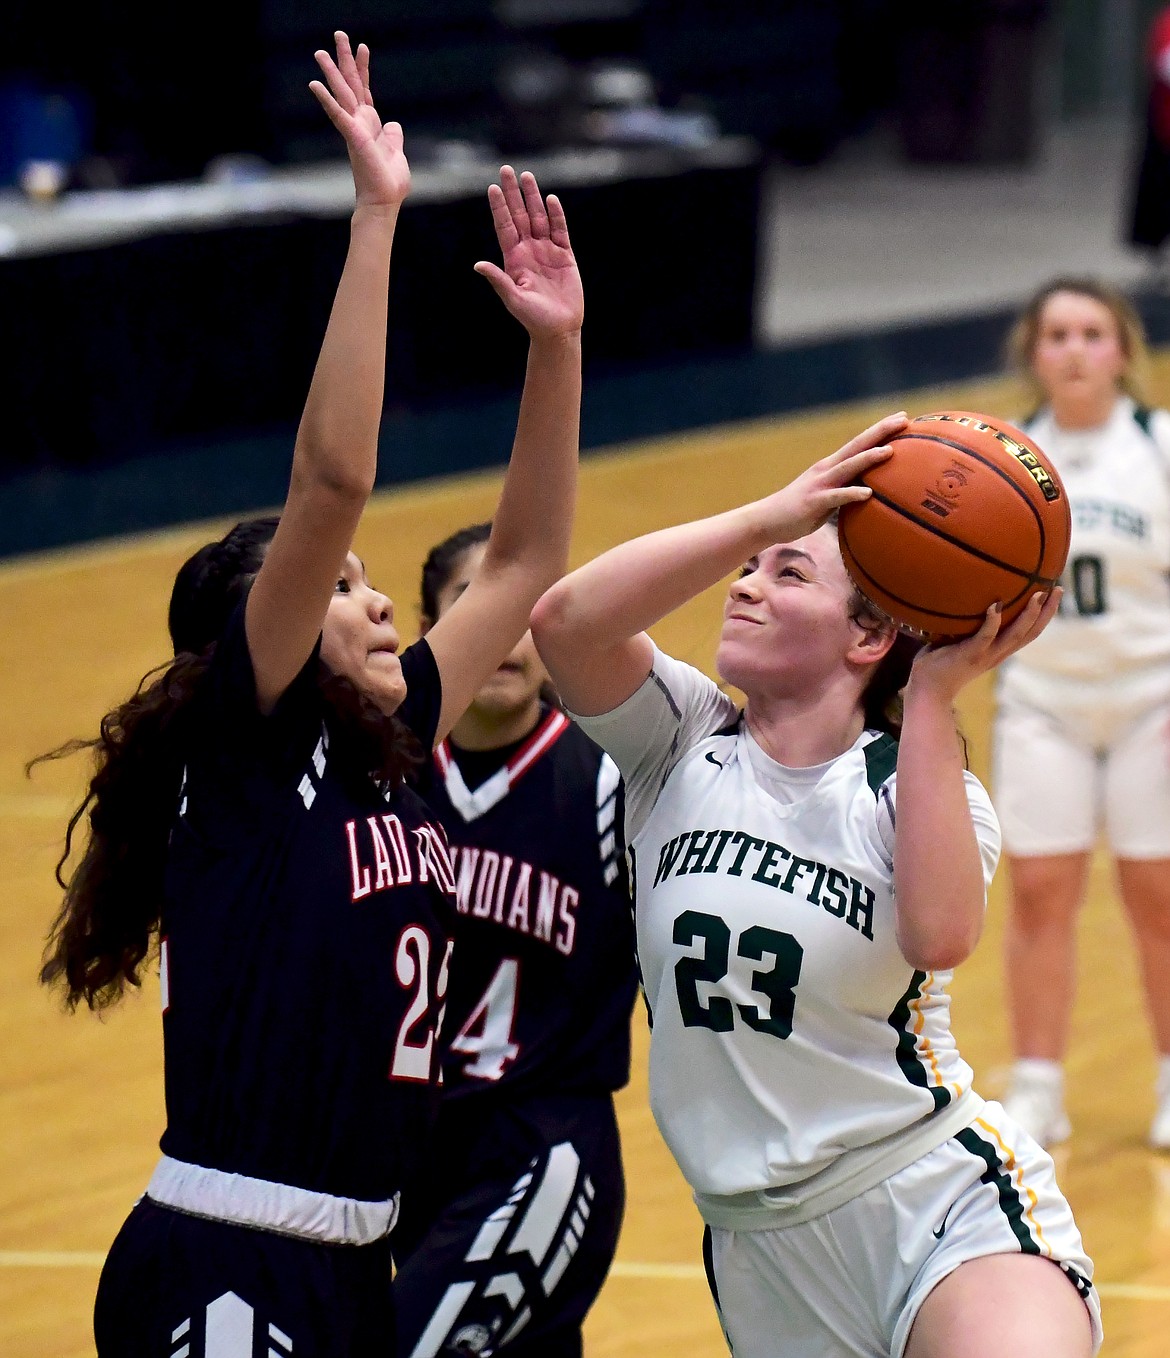 Whitefish's Gracie Smyley drives to the hoop against Browning during the Western A Divisional Tournament on Saturday in Butte. (Teresa Byrd/Hungry Horse News)